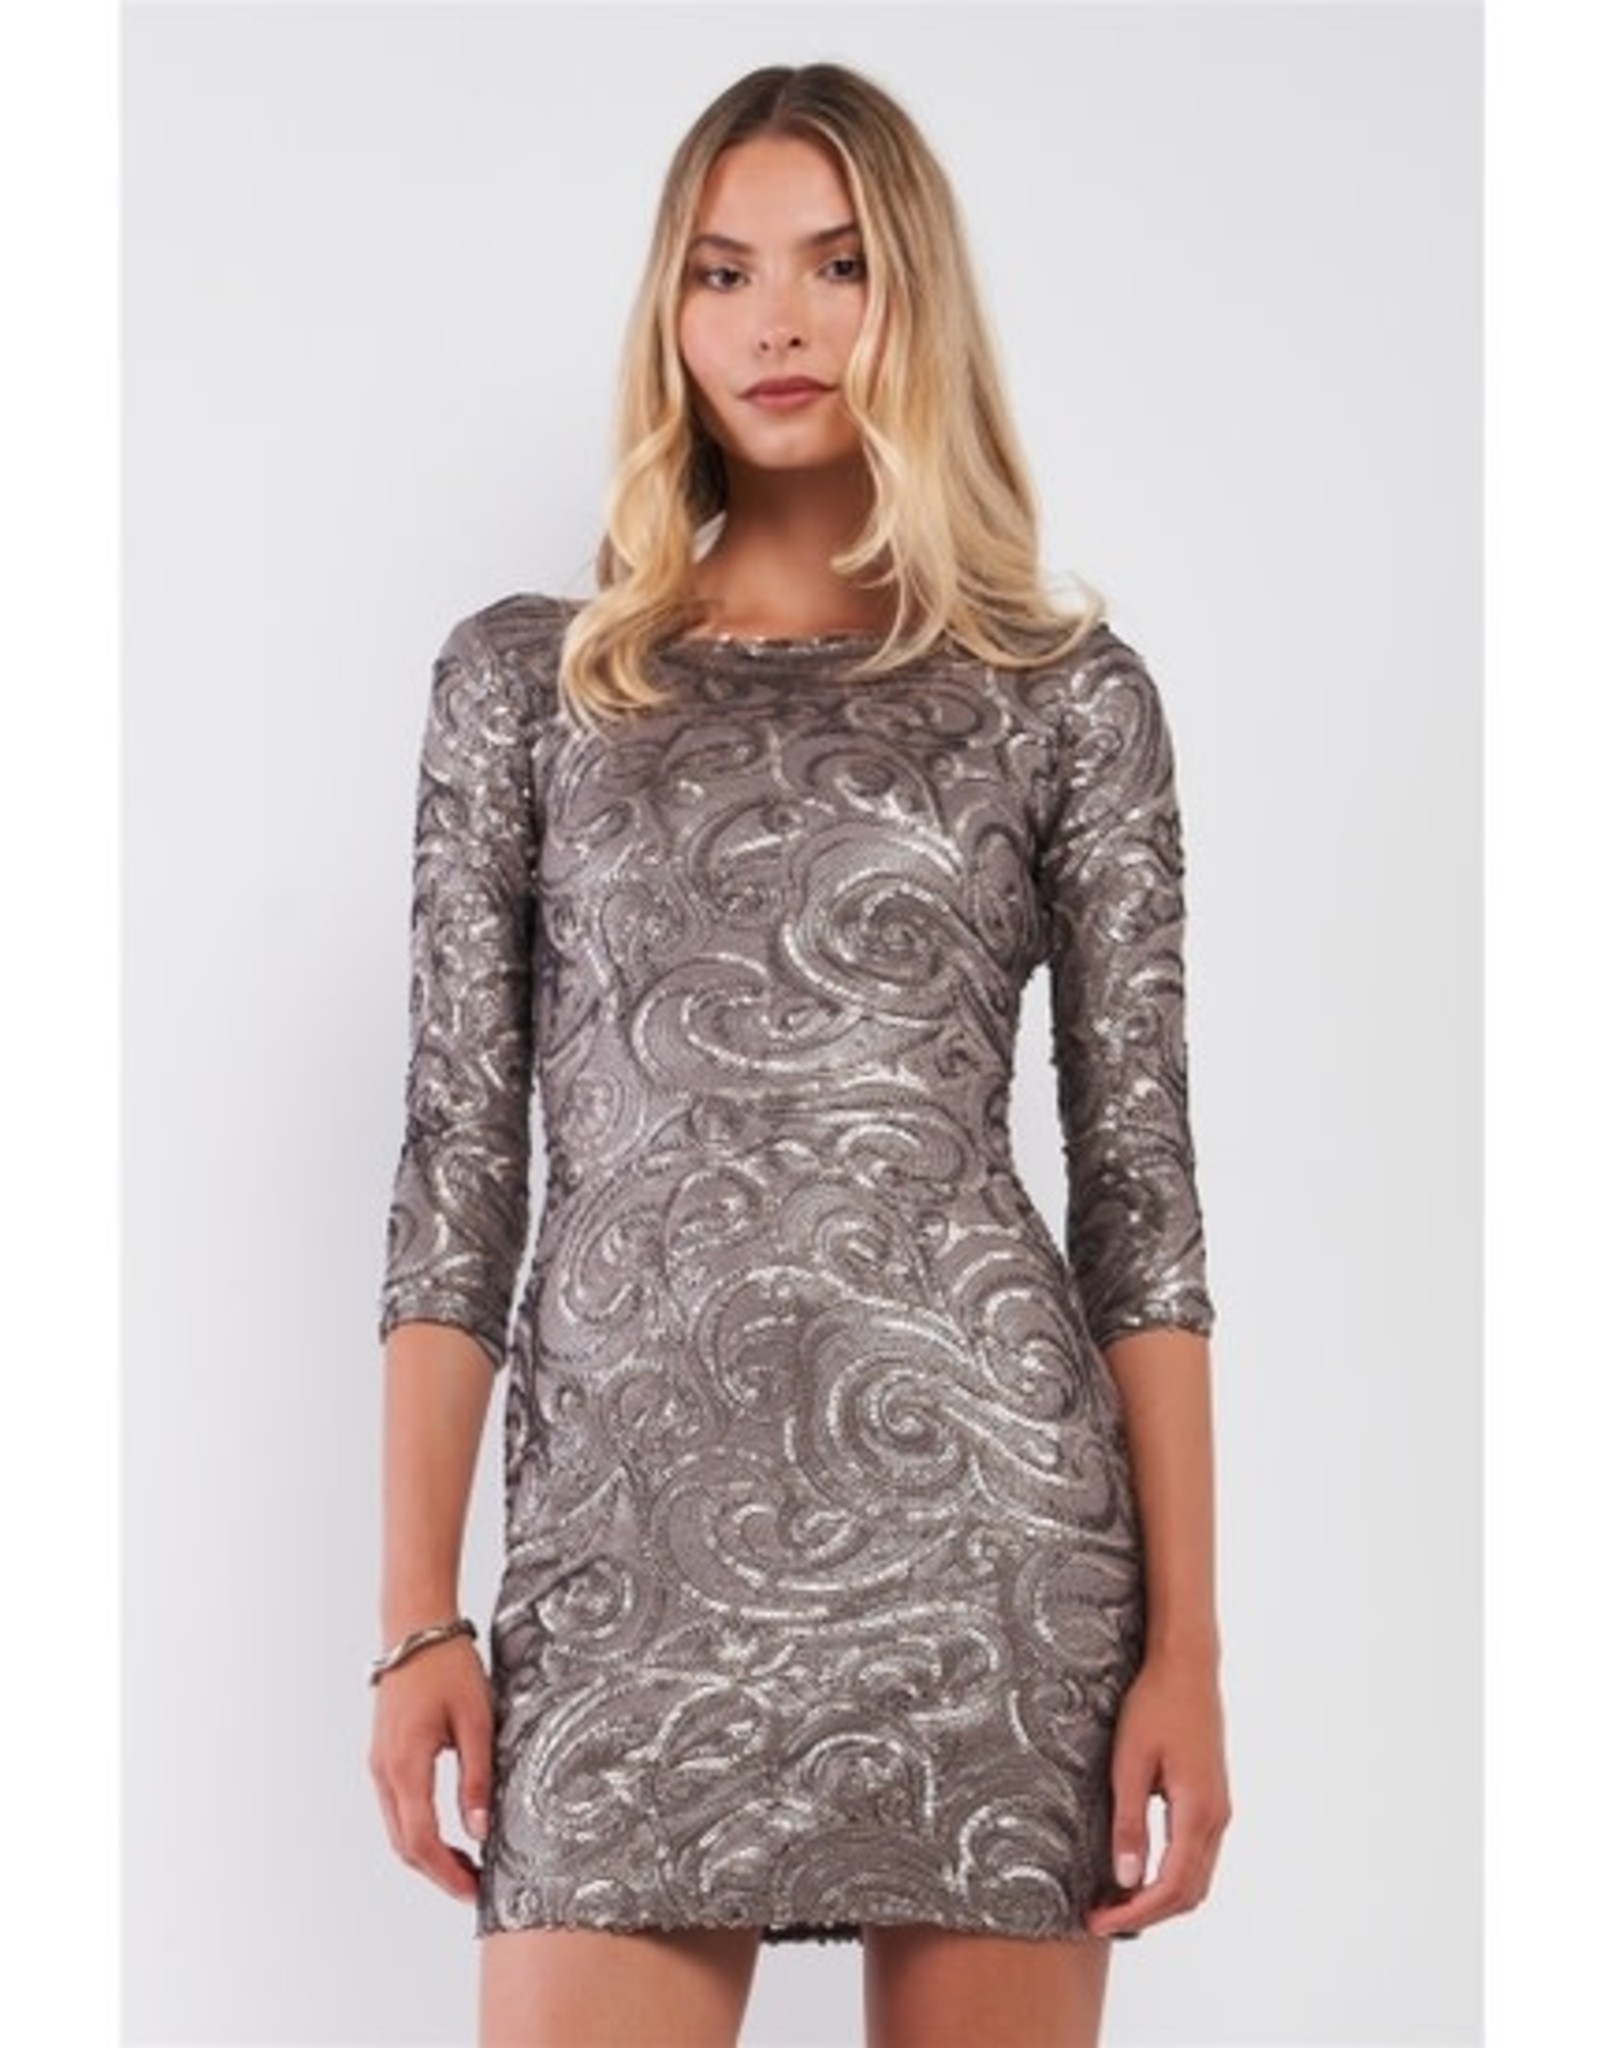 Oxidized Gold Sequin Embroidery Midi Sleeve Dress